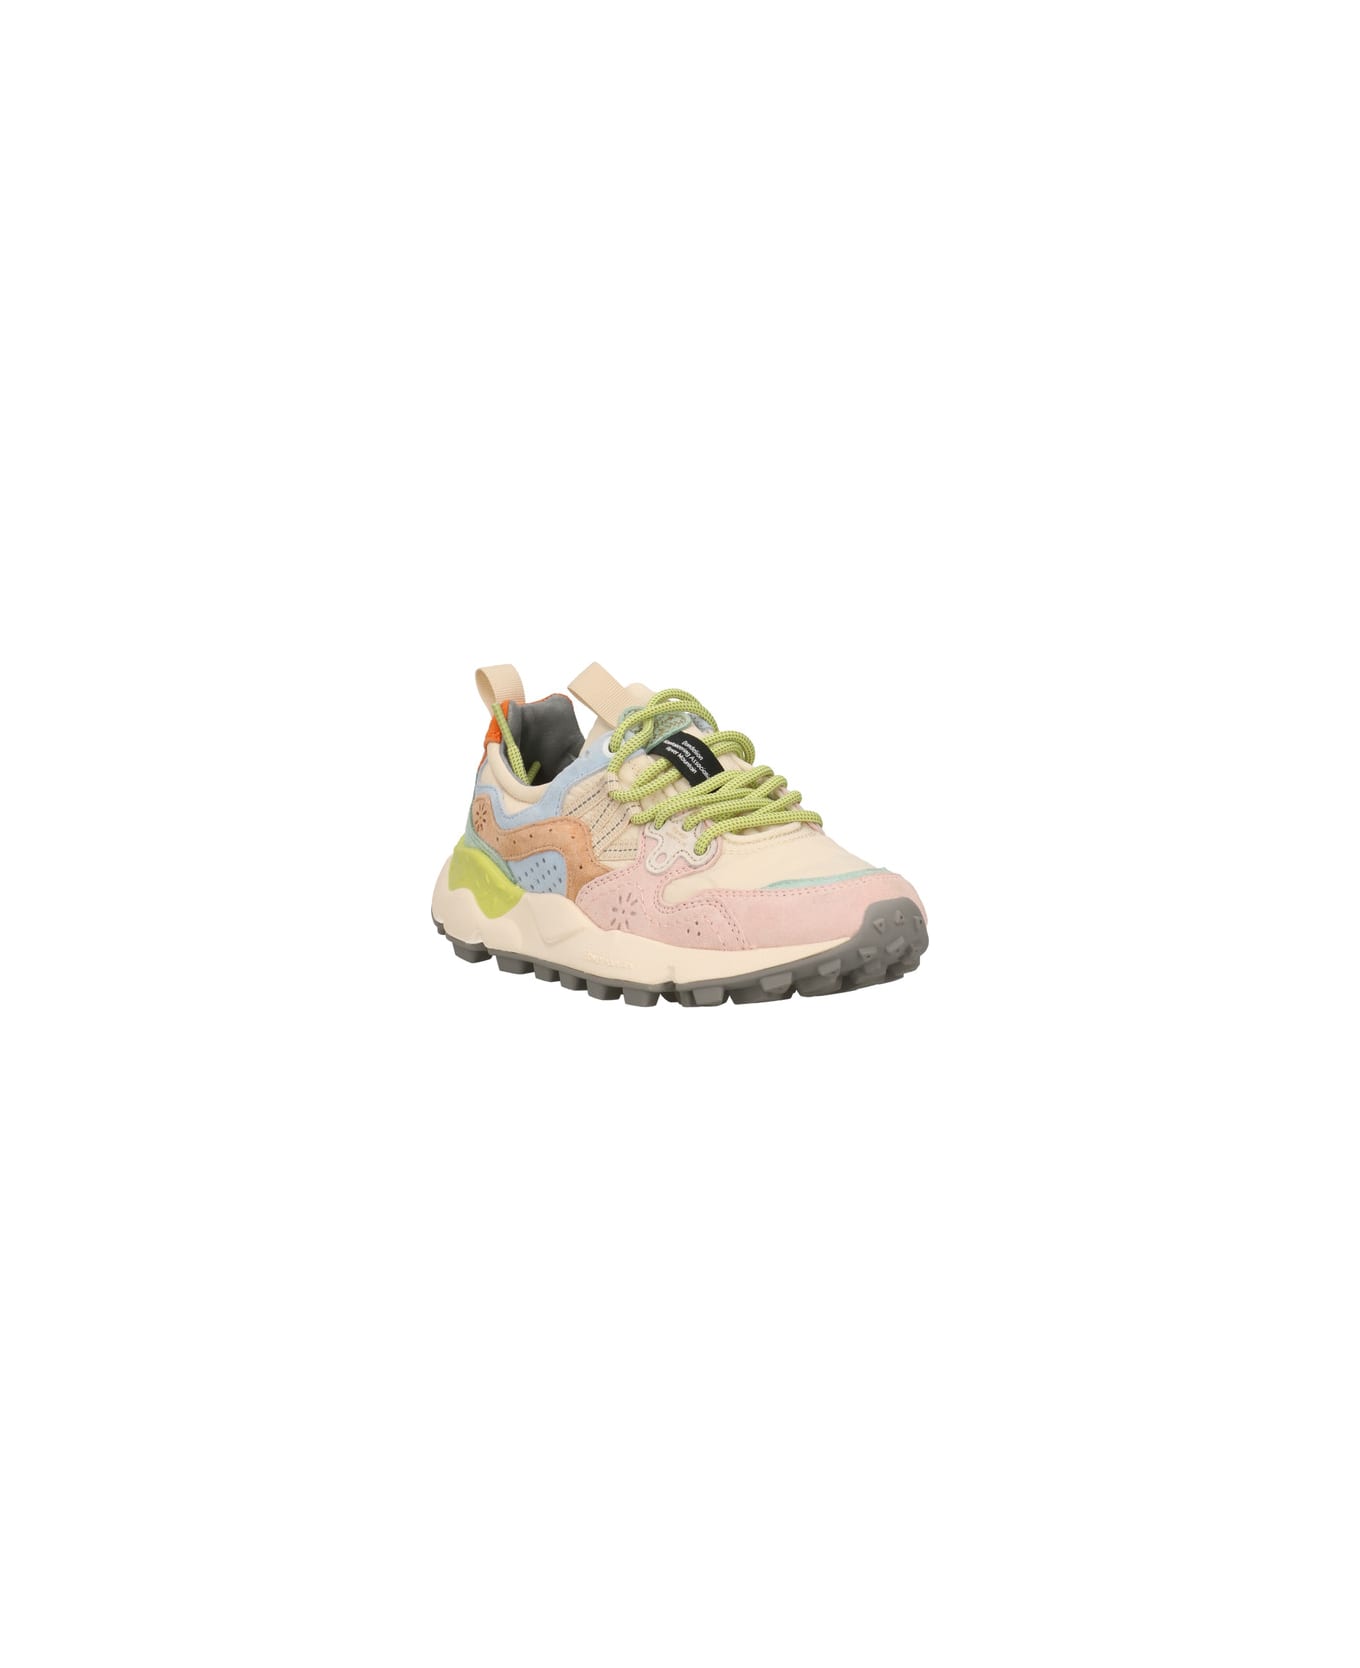 Flower Mountain Yamano3 Sneakers - Multicolor